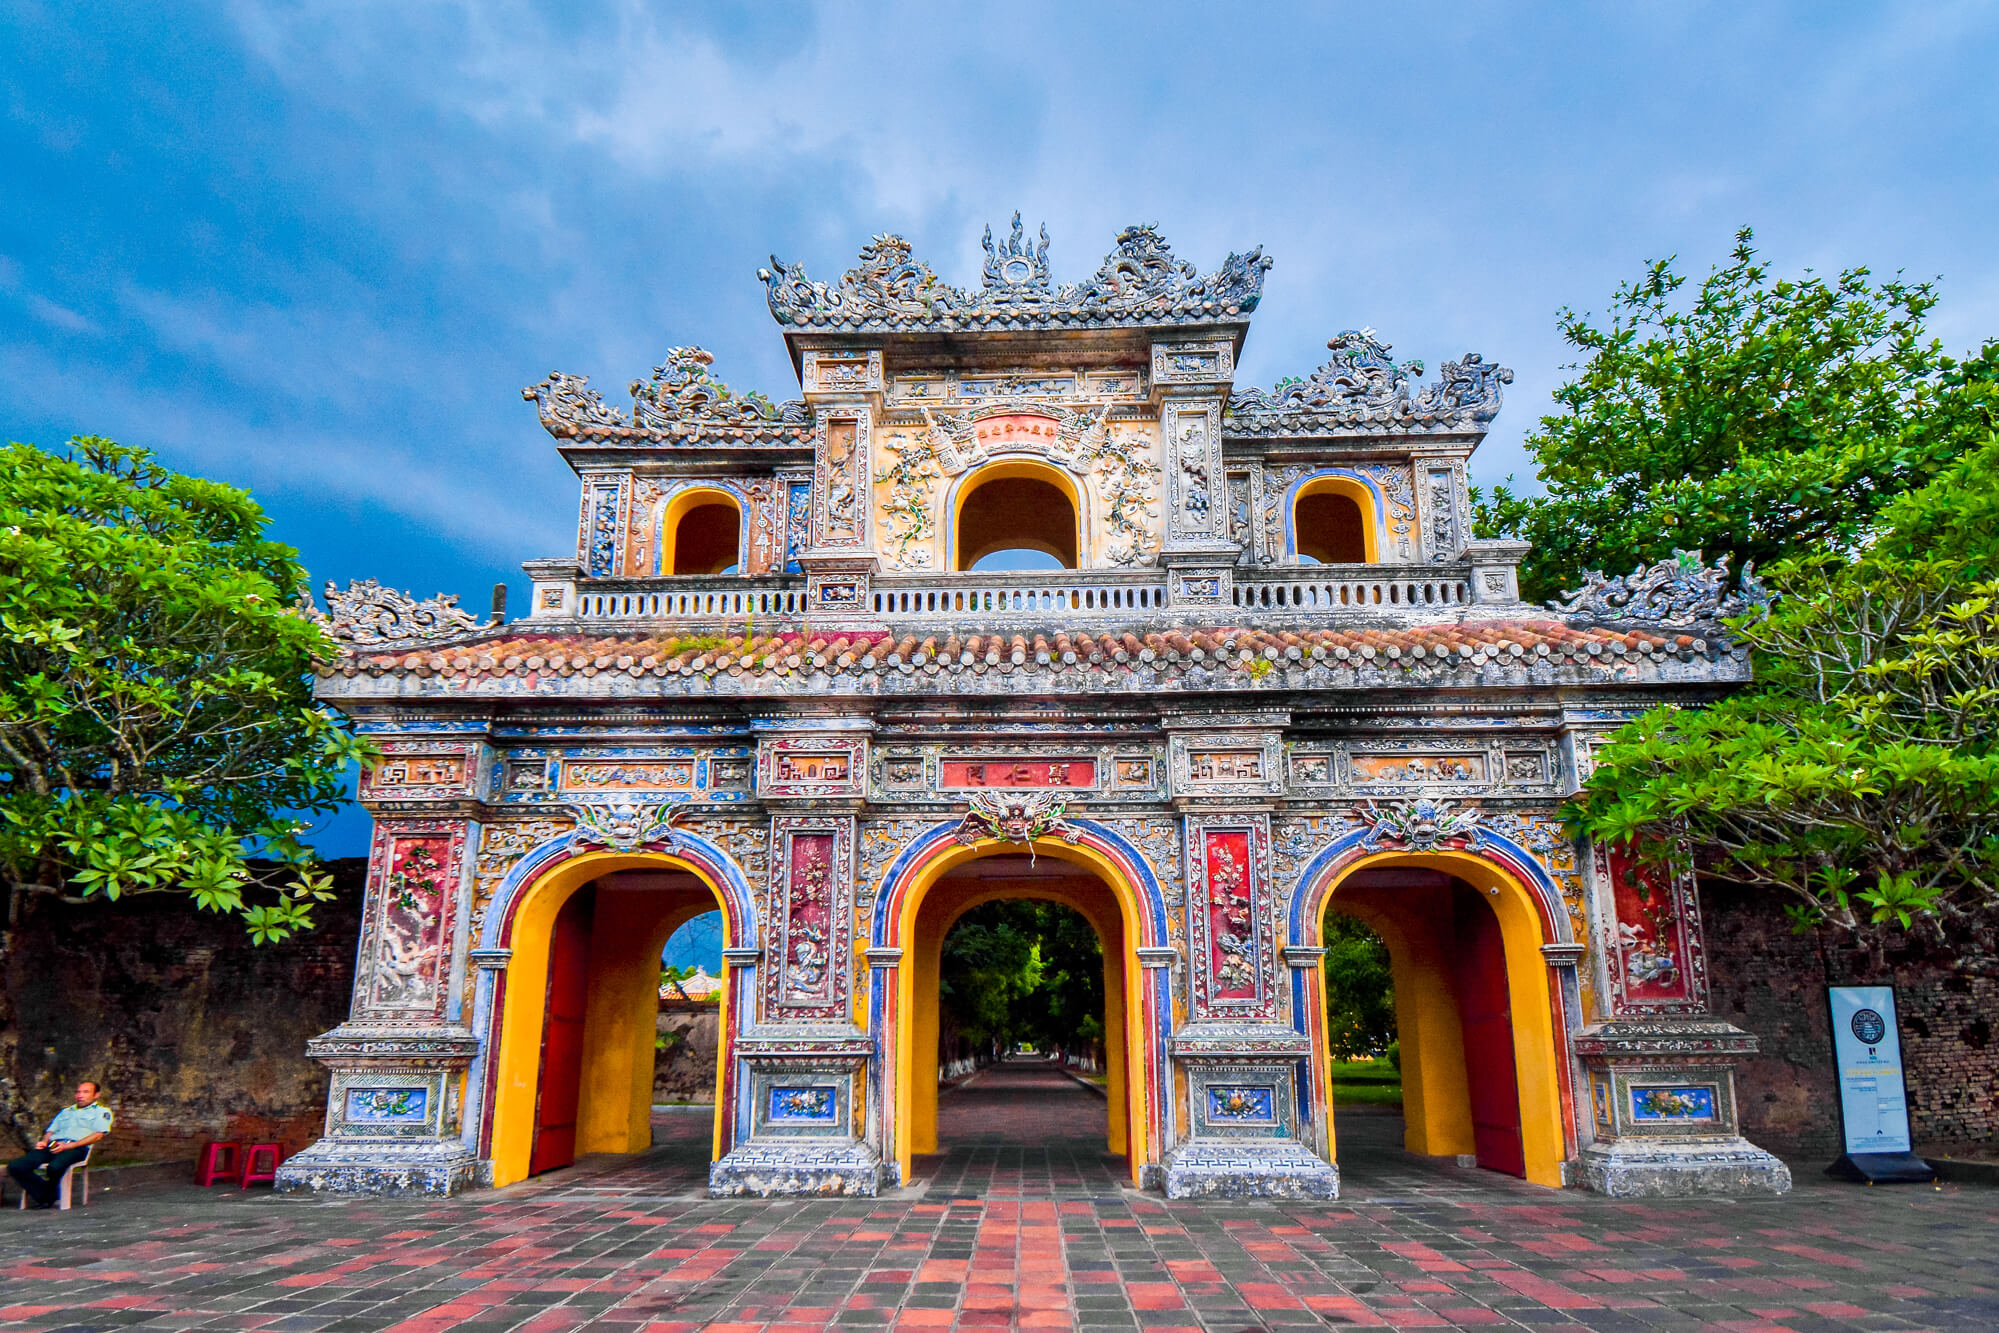 The Imperial City of Hue has charming beauty